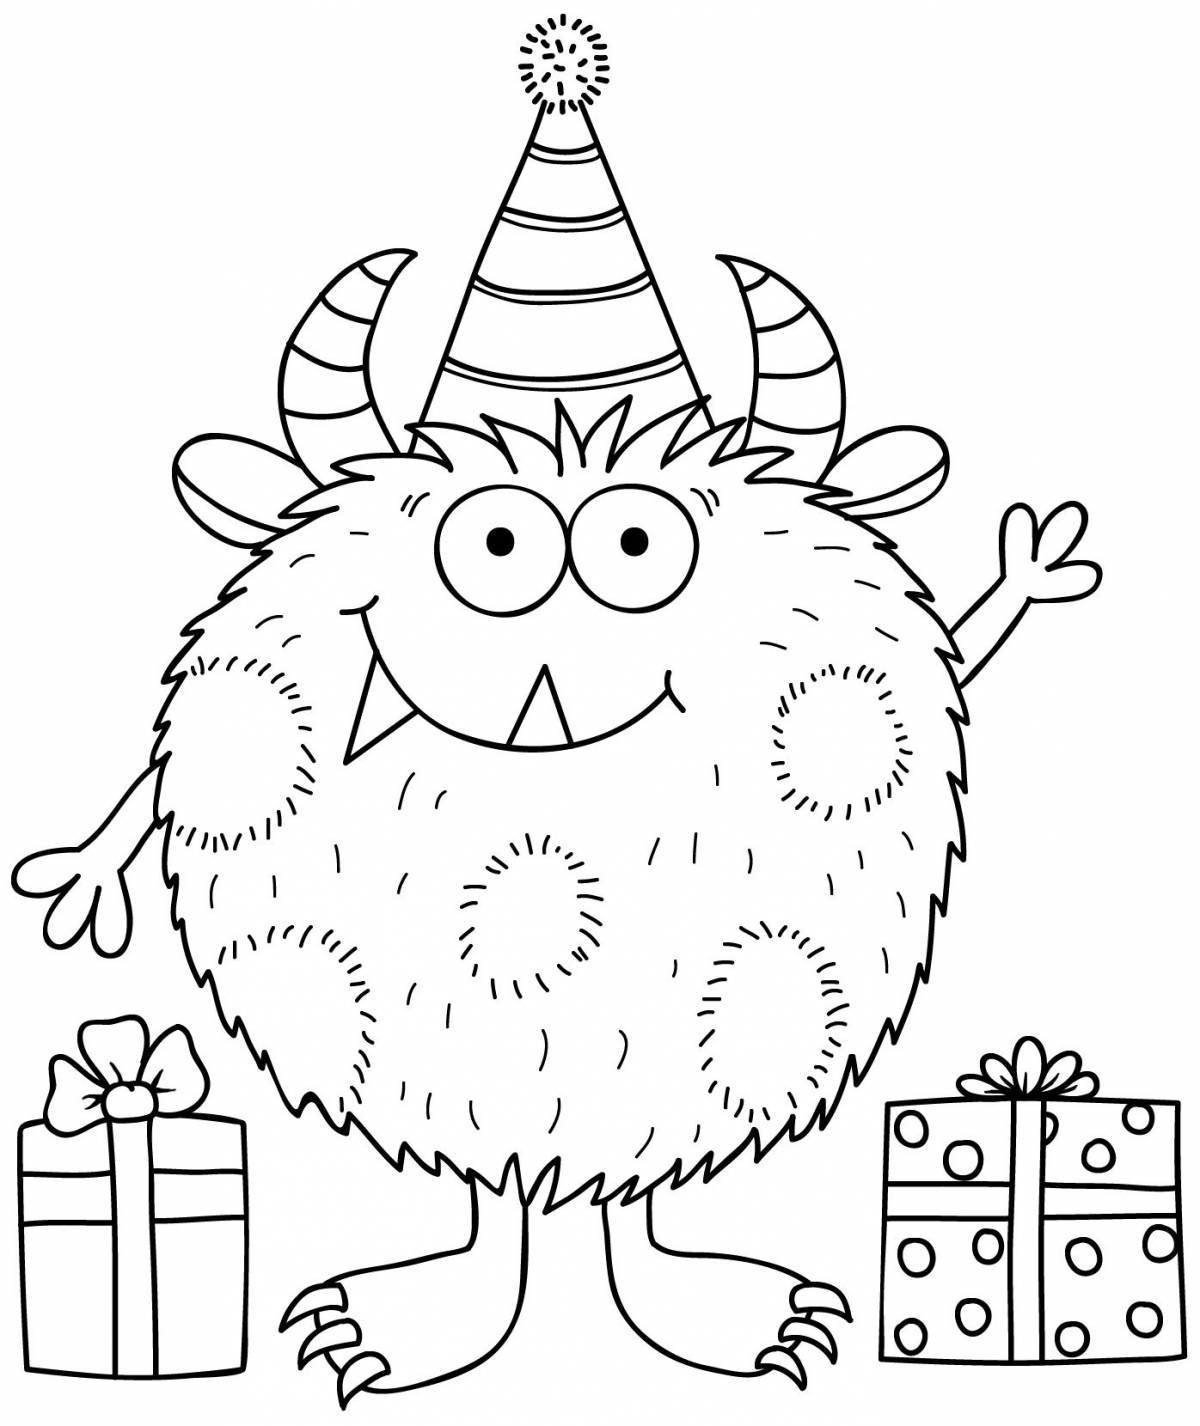 Scary monster coloring pages